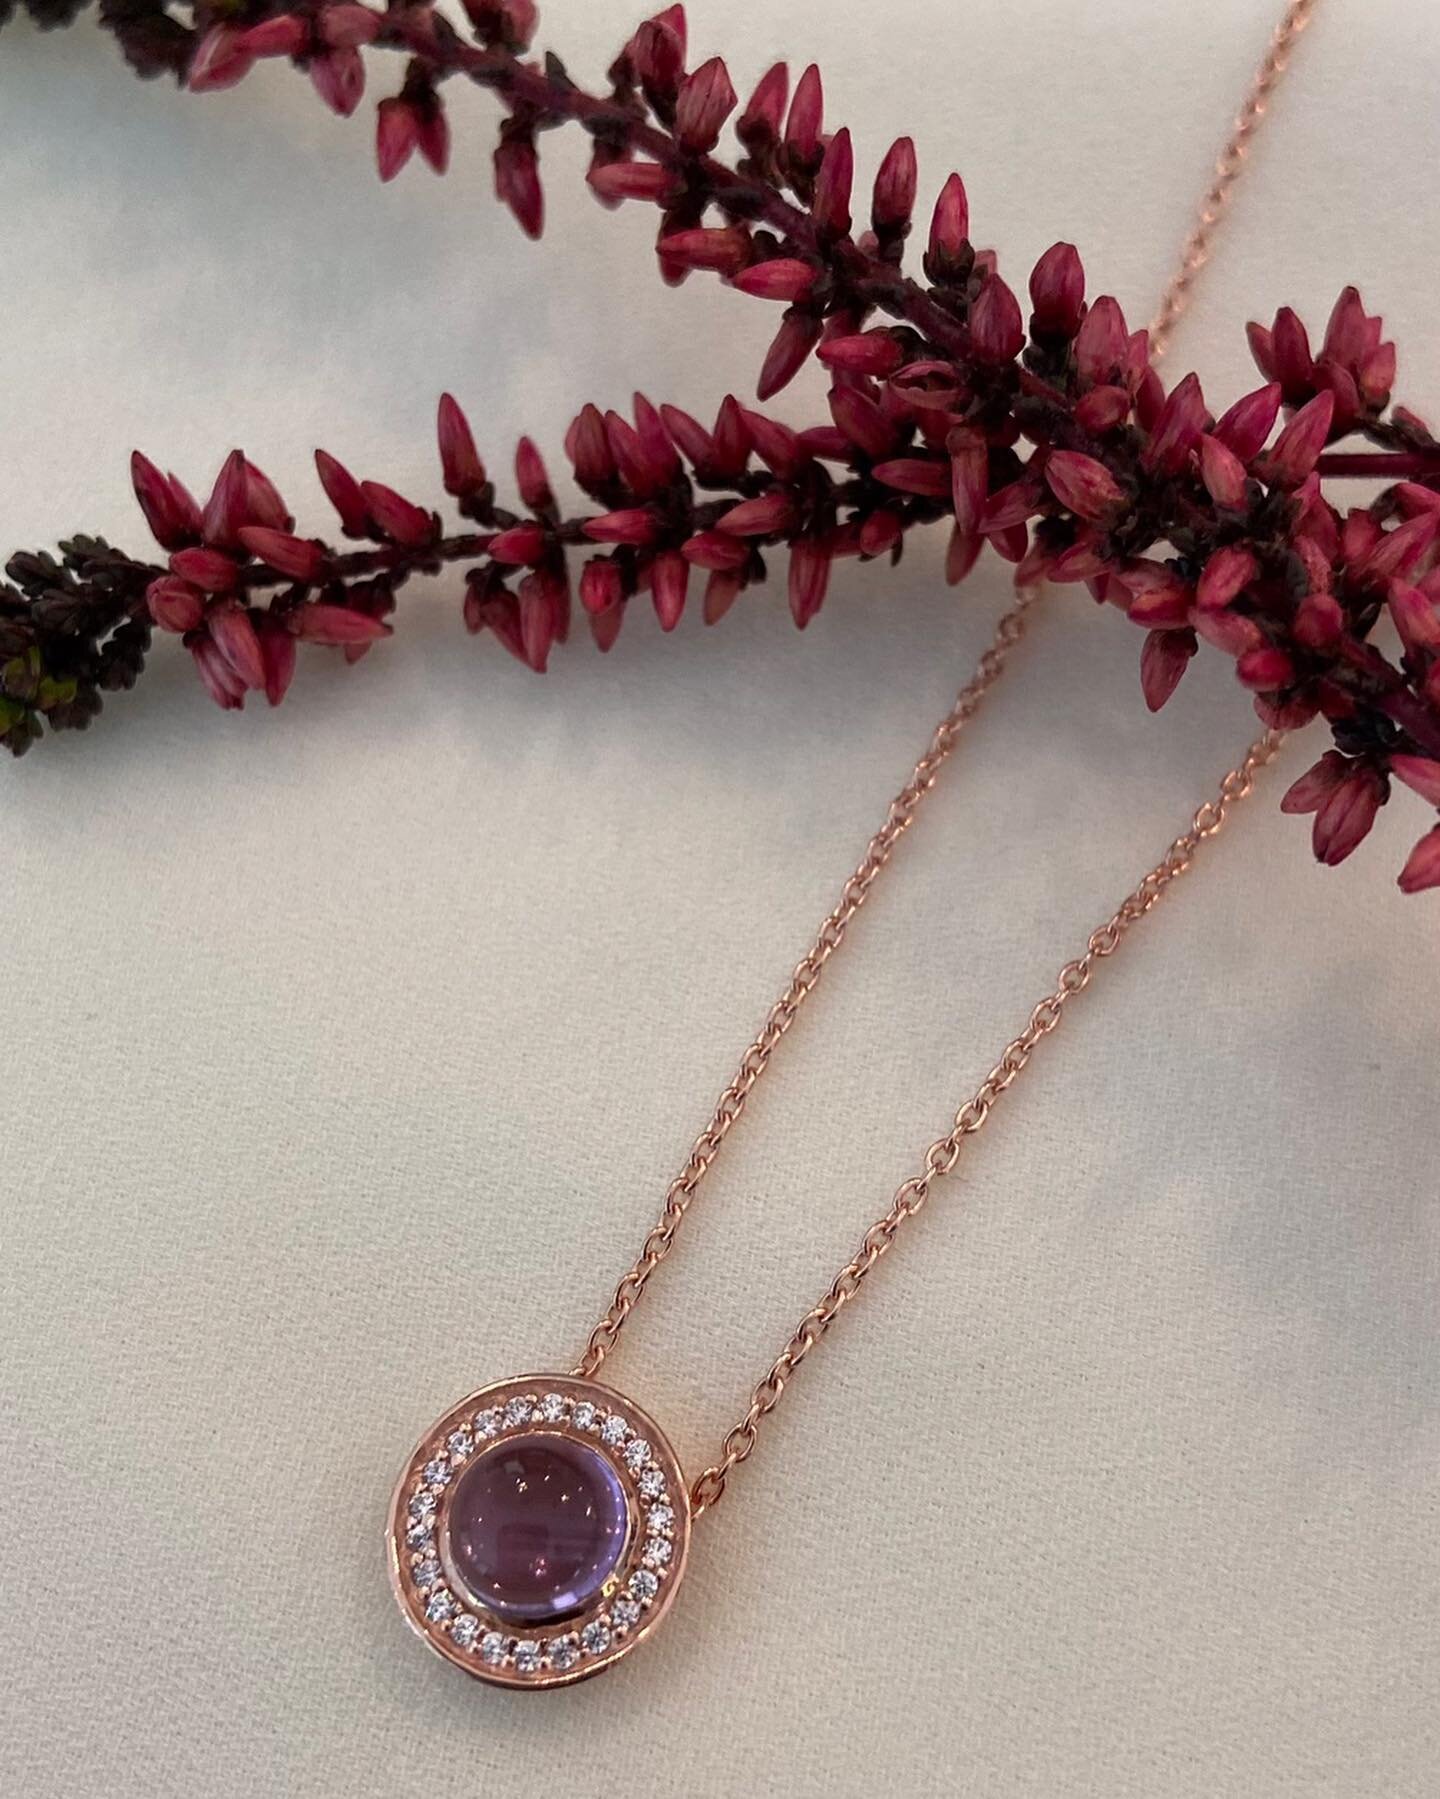 The world needs our mothers - Liya Kebede 

Our Mothers deserve a gift 💝

The Amethyst pendant would make a perfect present this Mother&rsquo;s Day, available only at www.ingridrossi.com (link in bio)

Gift box included 🎁

&bull;
&bull;
&bull;
&bul